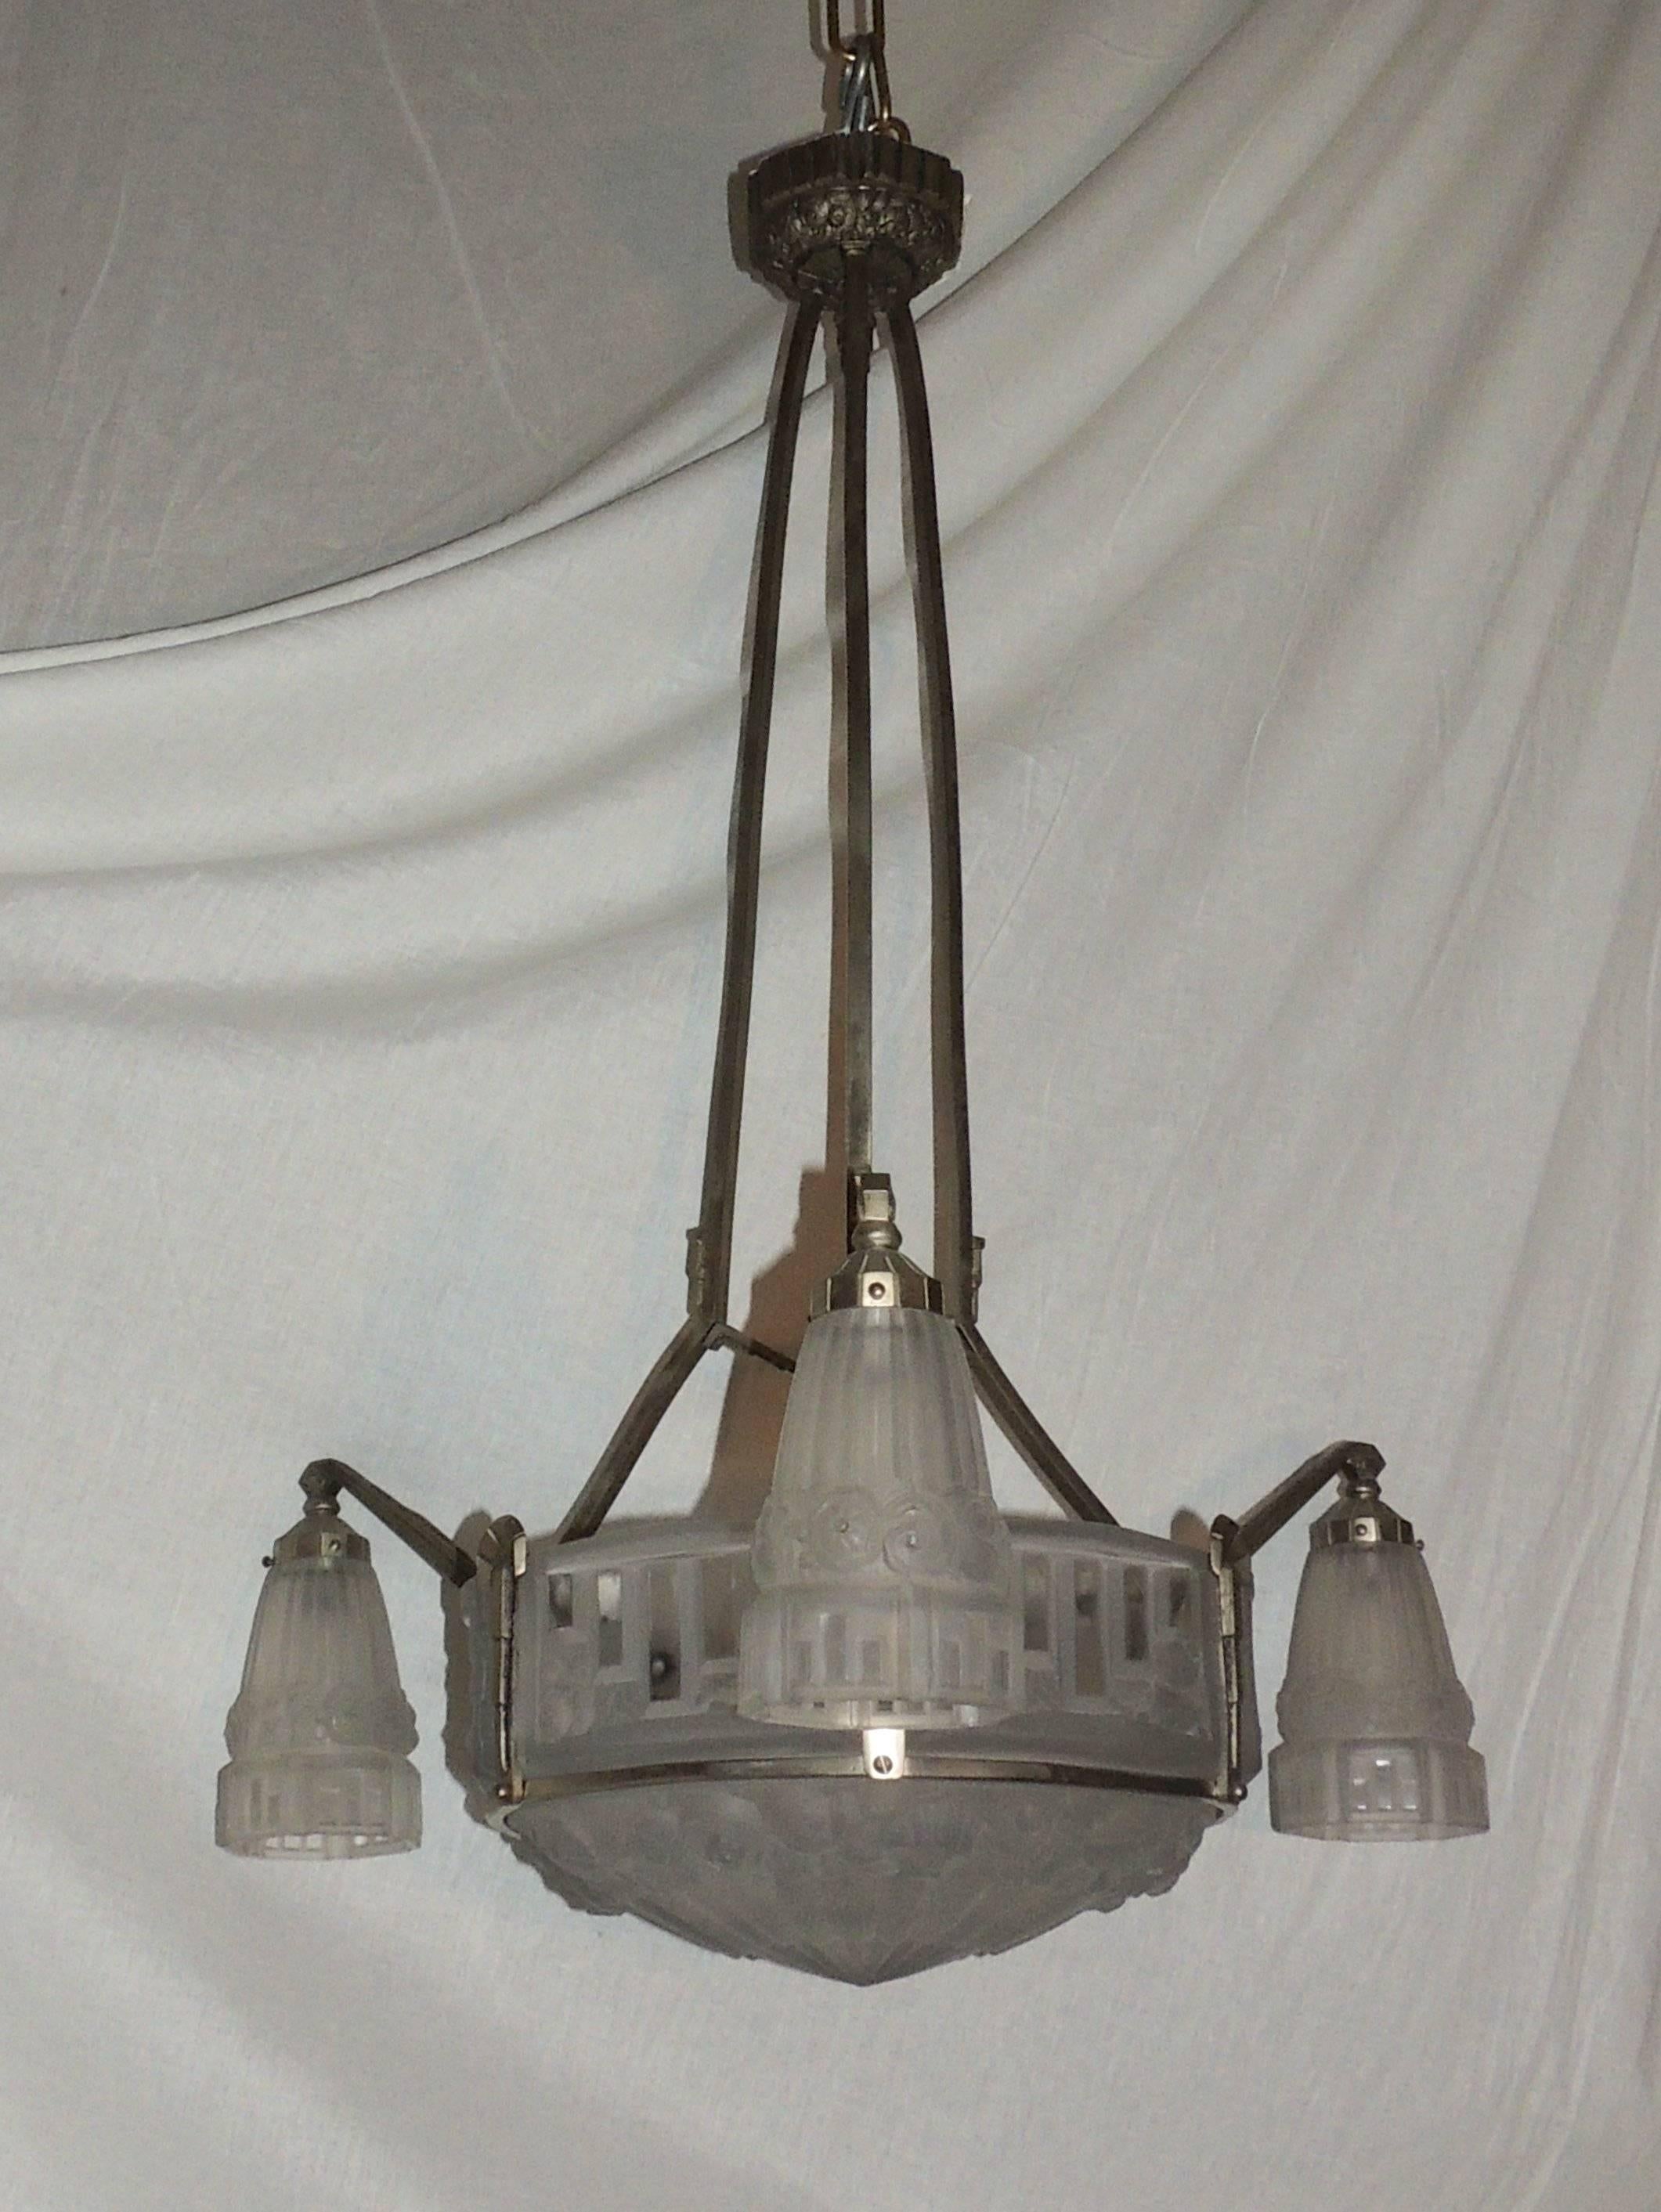 A large silvered bronze Art Deco chandelier with large Round centre and square shape panel frosted glass with a mix of graphics and roses around the band. There are three arms with matching shades and three interior lights in the